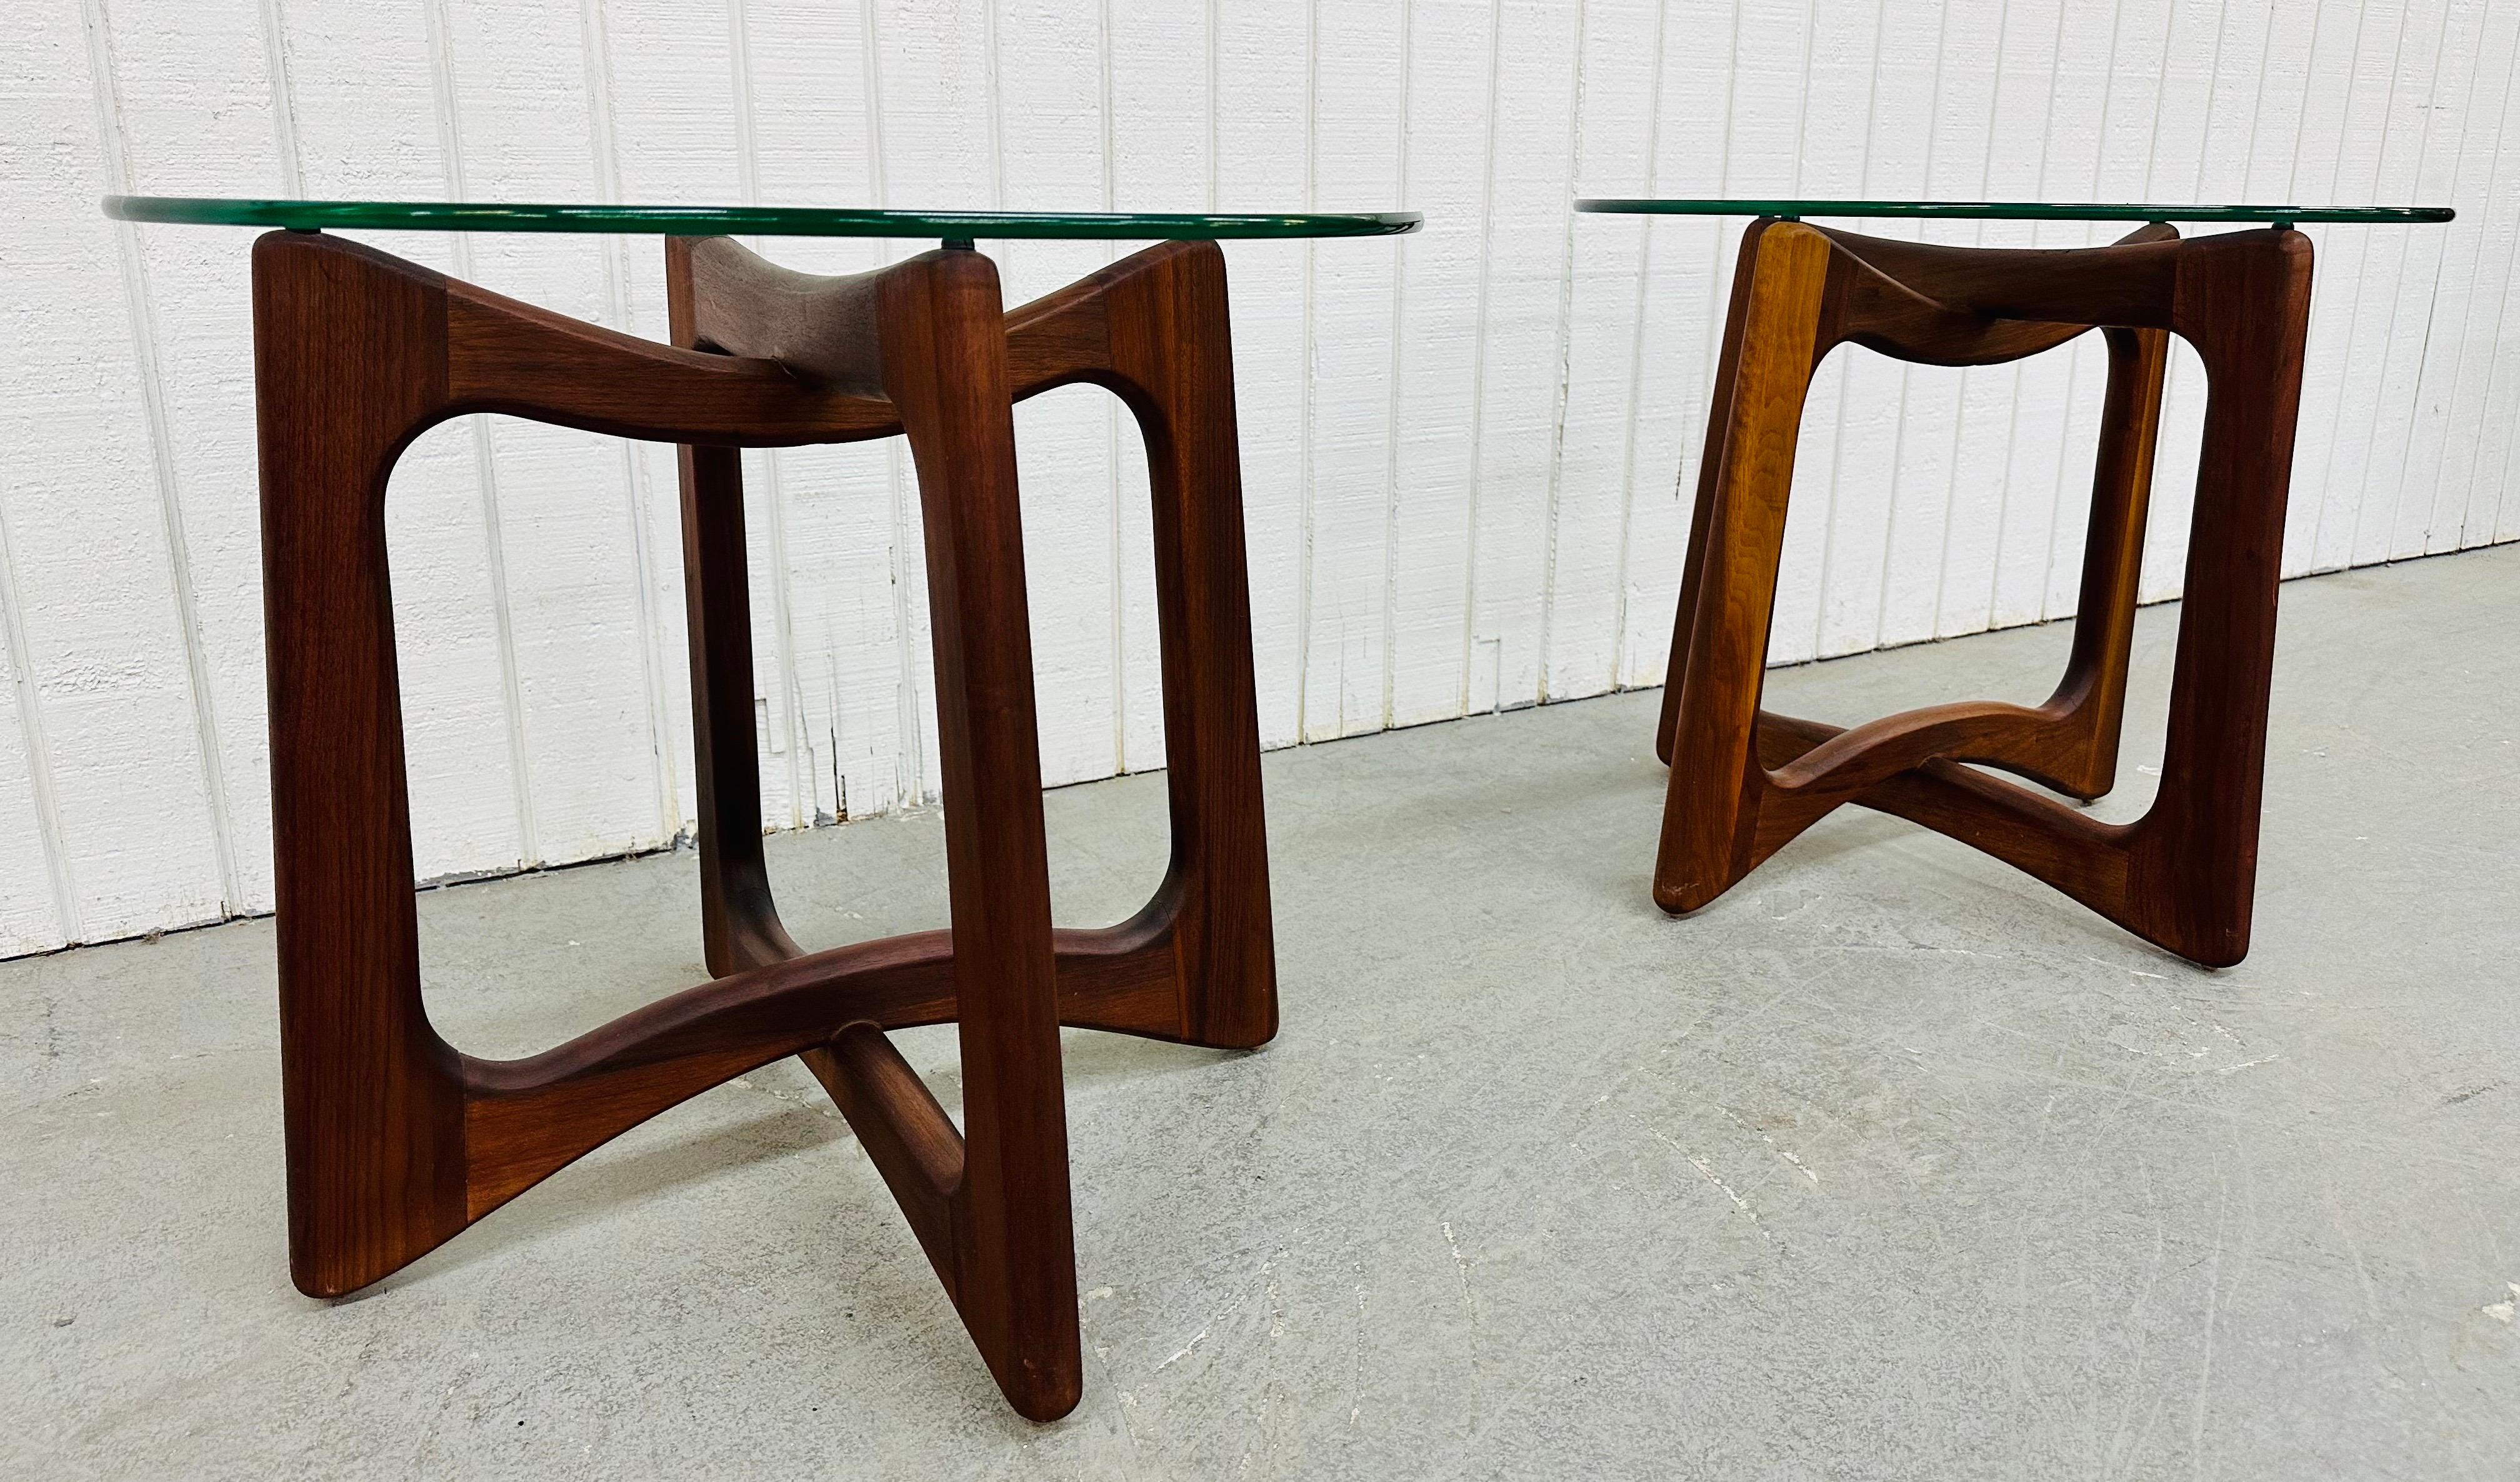 20th Century Mid-Century Modern Adrian Pearsall Walnut Glass Top Side Tables - Set of 2 For Sale